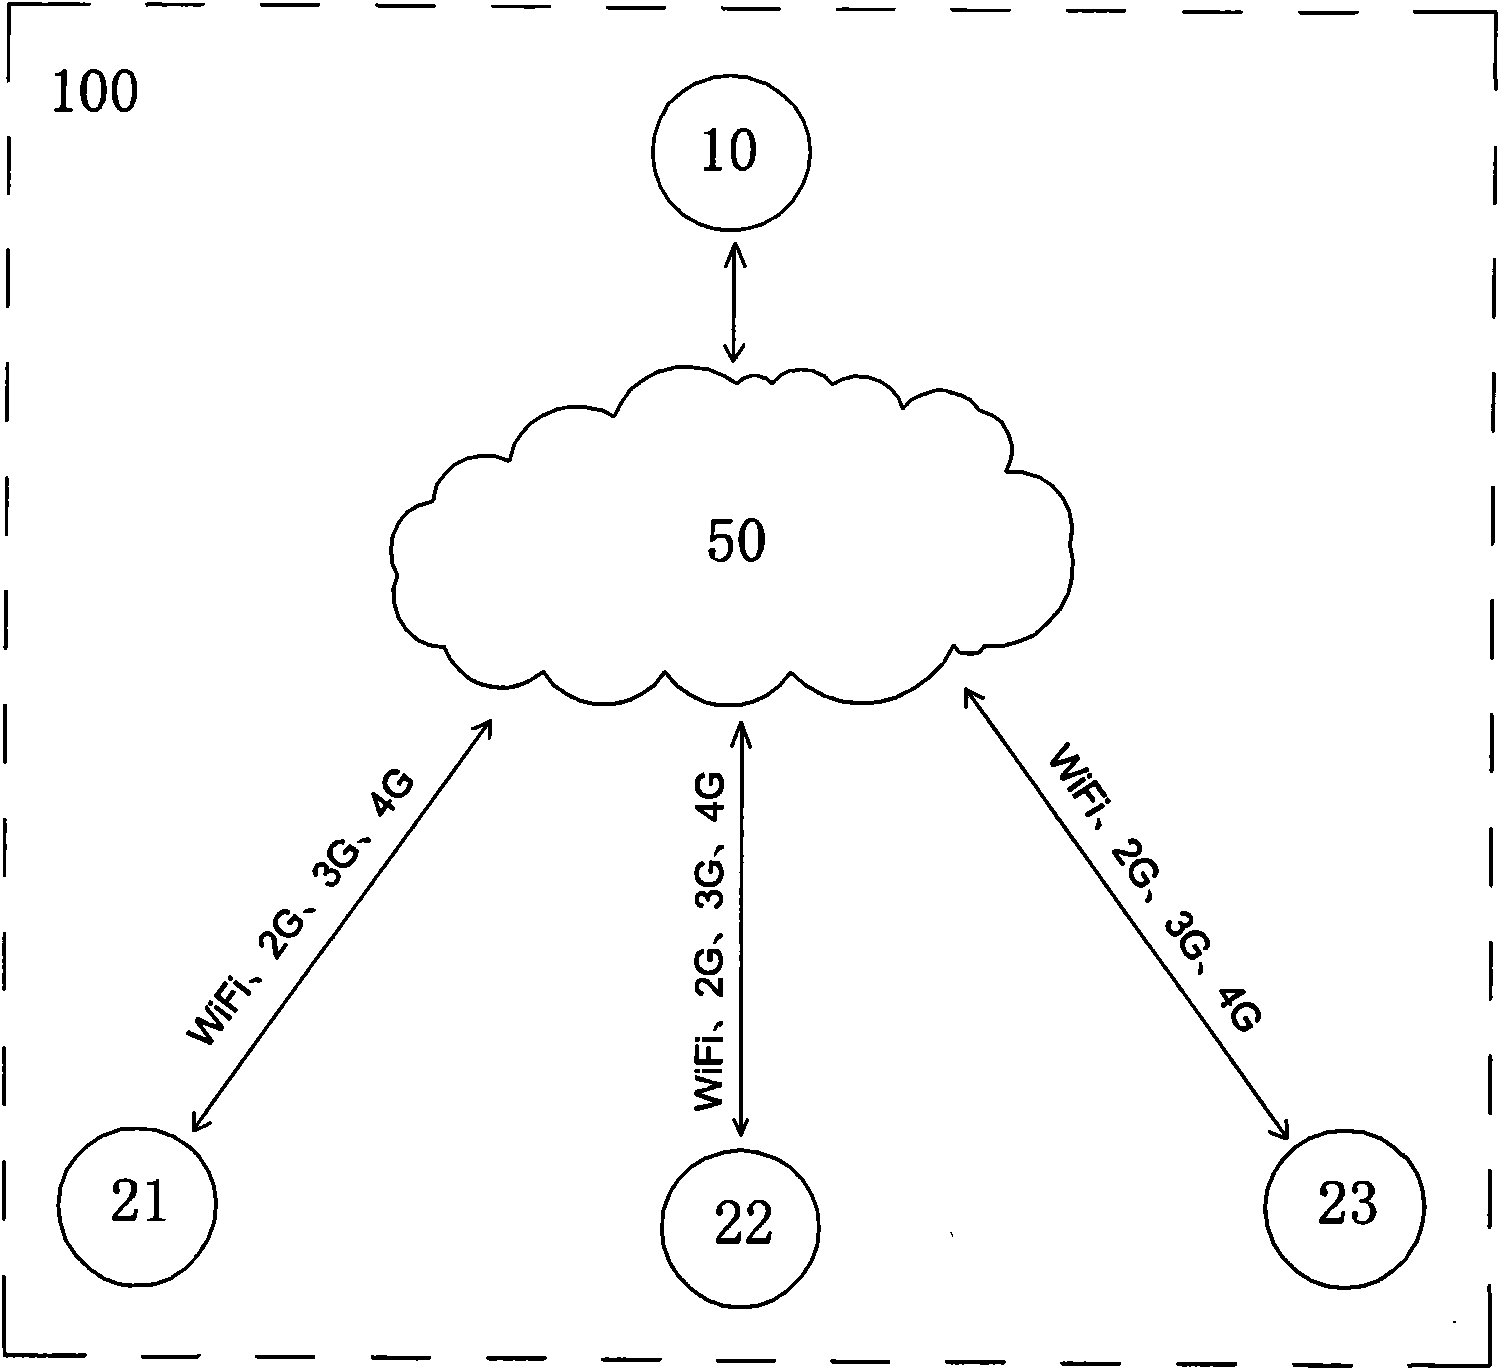 Real-time positioning information interaction system